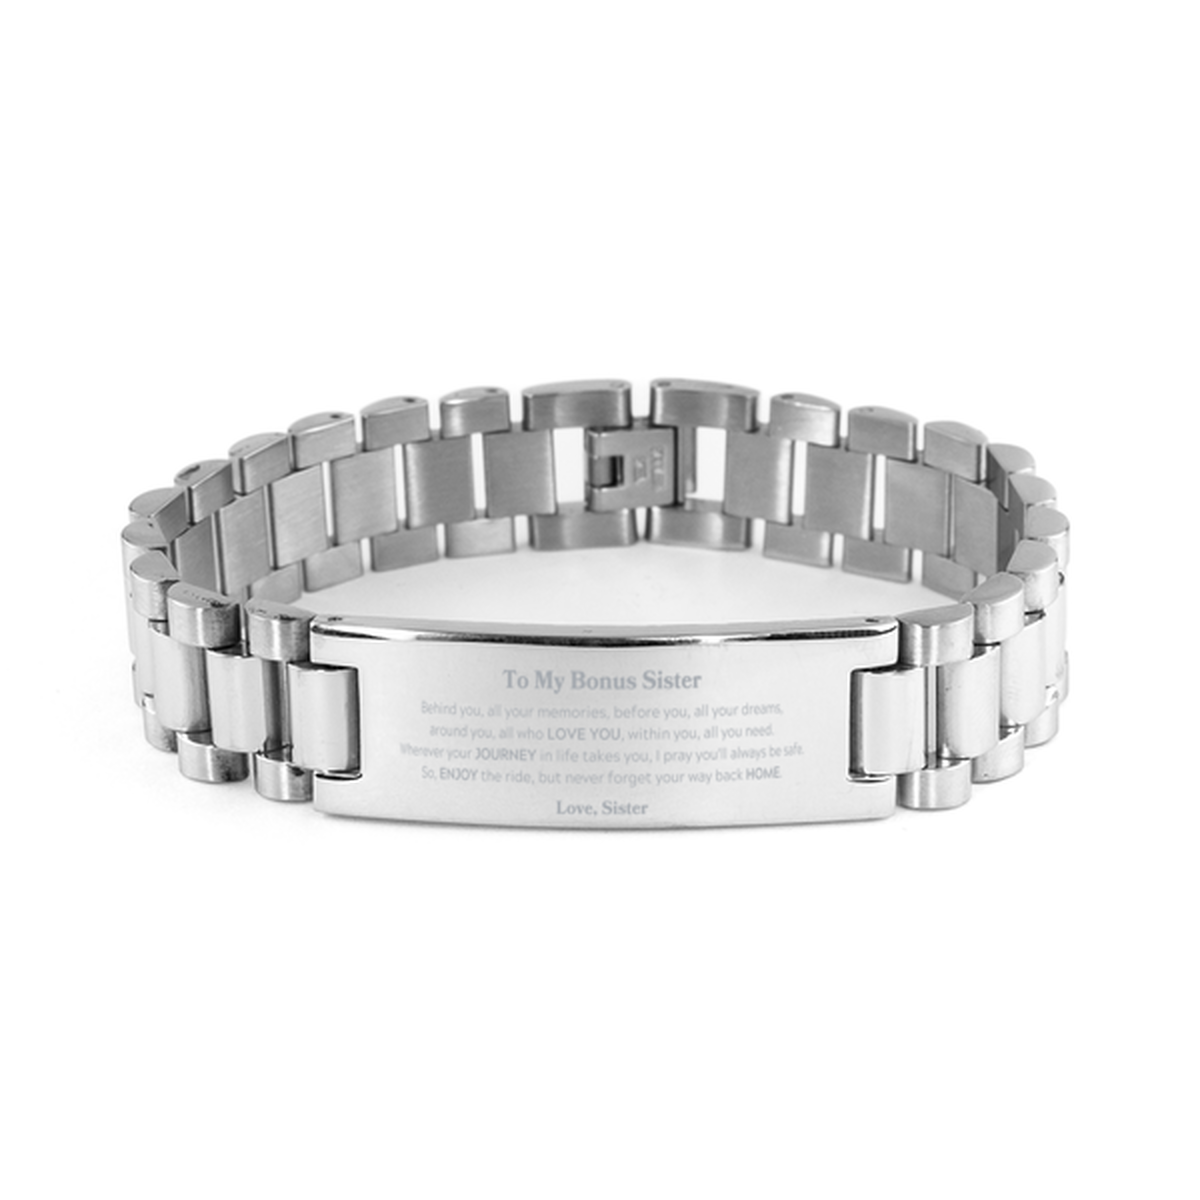 To My Bonus Sister Graduation Gifts from Sister, Bonus Sister Ladder Stainless Steel Bracelet Christmas Birthday Gifts for Bonus Sister Behind you, all your memories, before you, all your dreams. Love, Sister